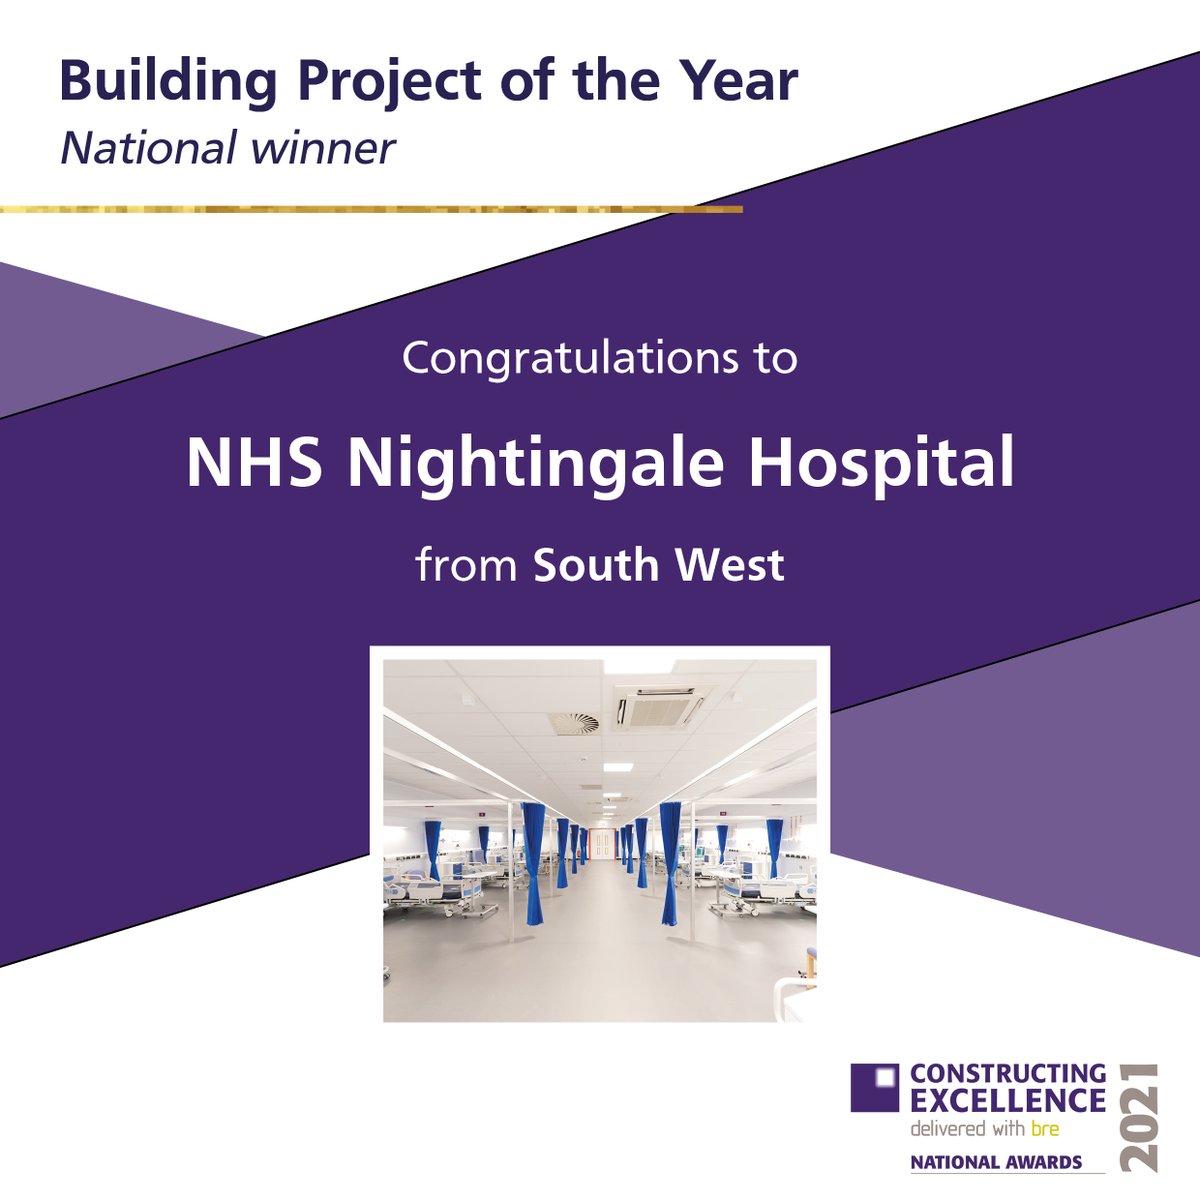 Last but not least, we have the Building Project of the Year award. 

The National Winner goes to - the NHS Nightingale Hospital from South West! This iconic project represents the highest standard of building and construction. 

Thank you for your support to #CE2021Awards!